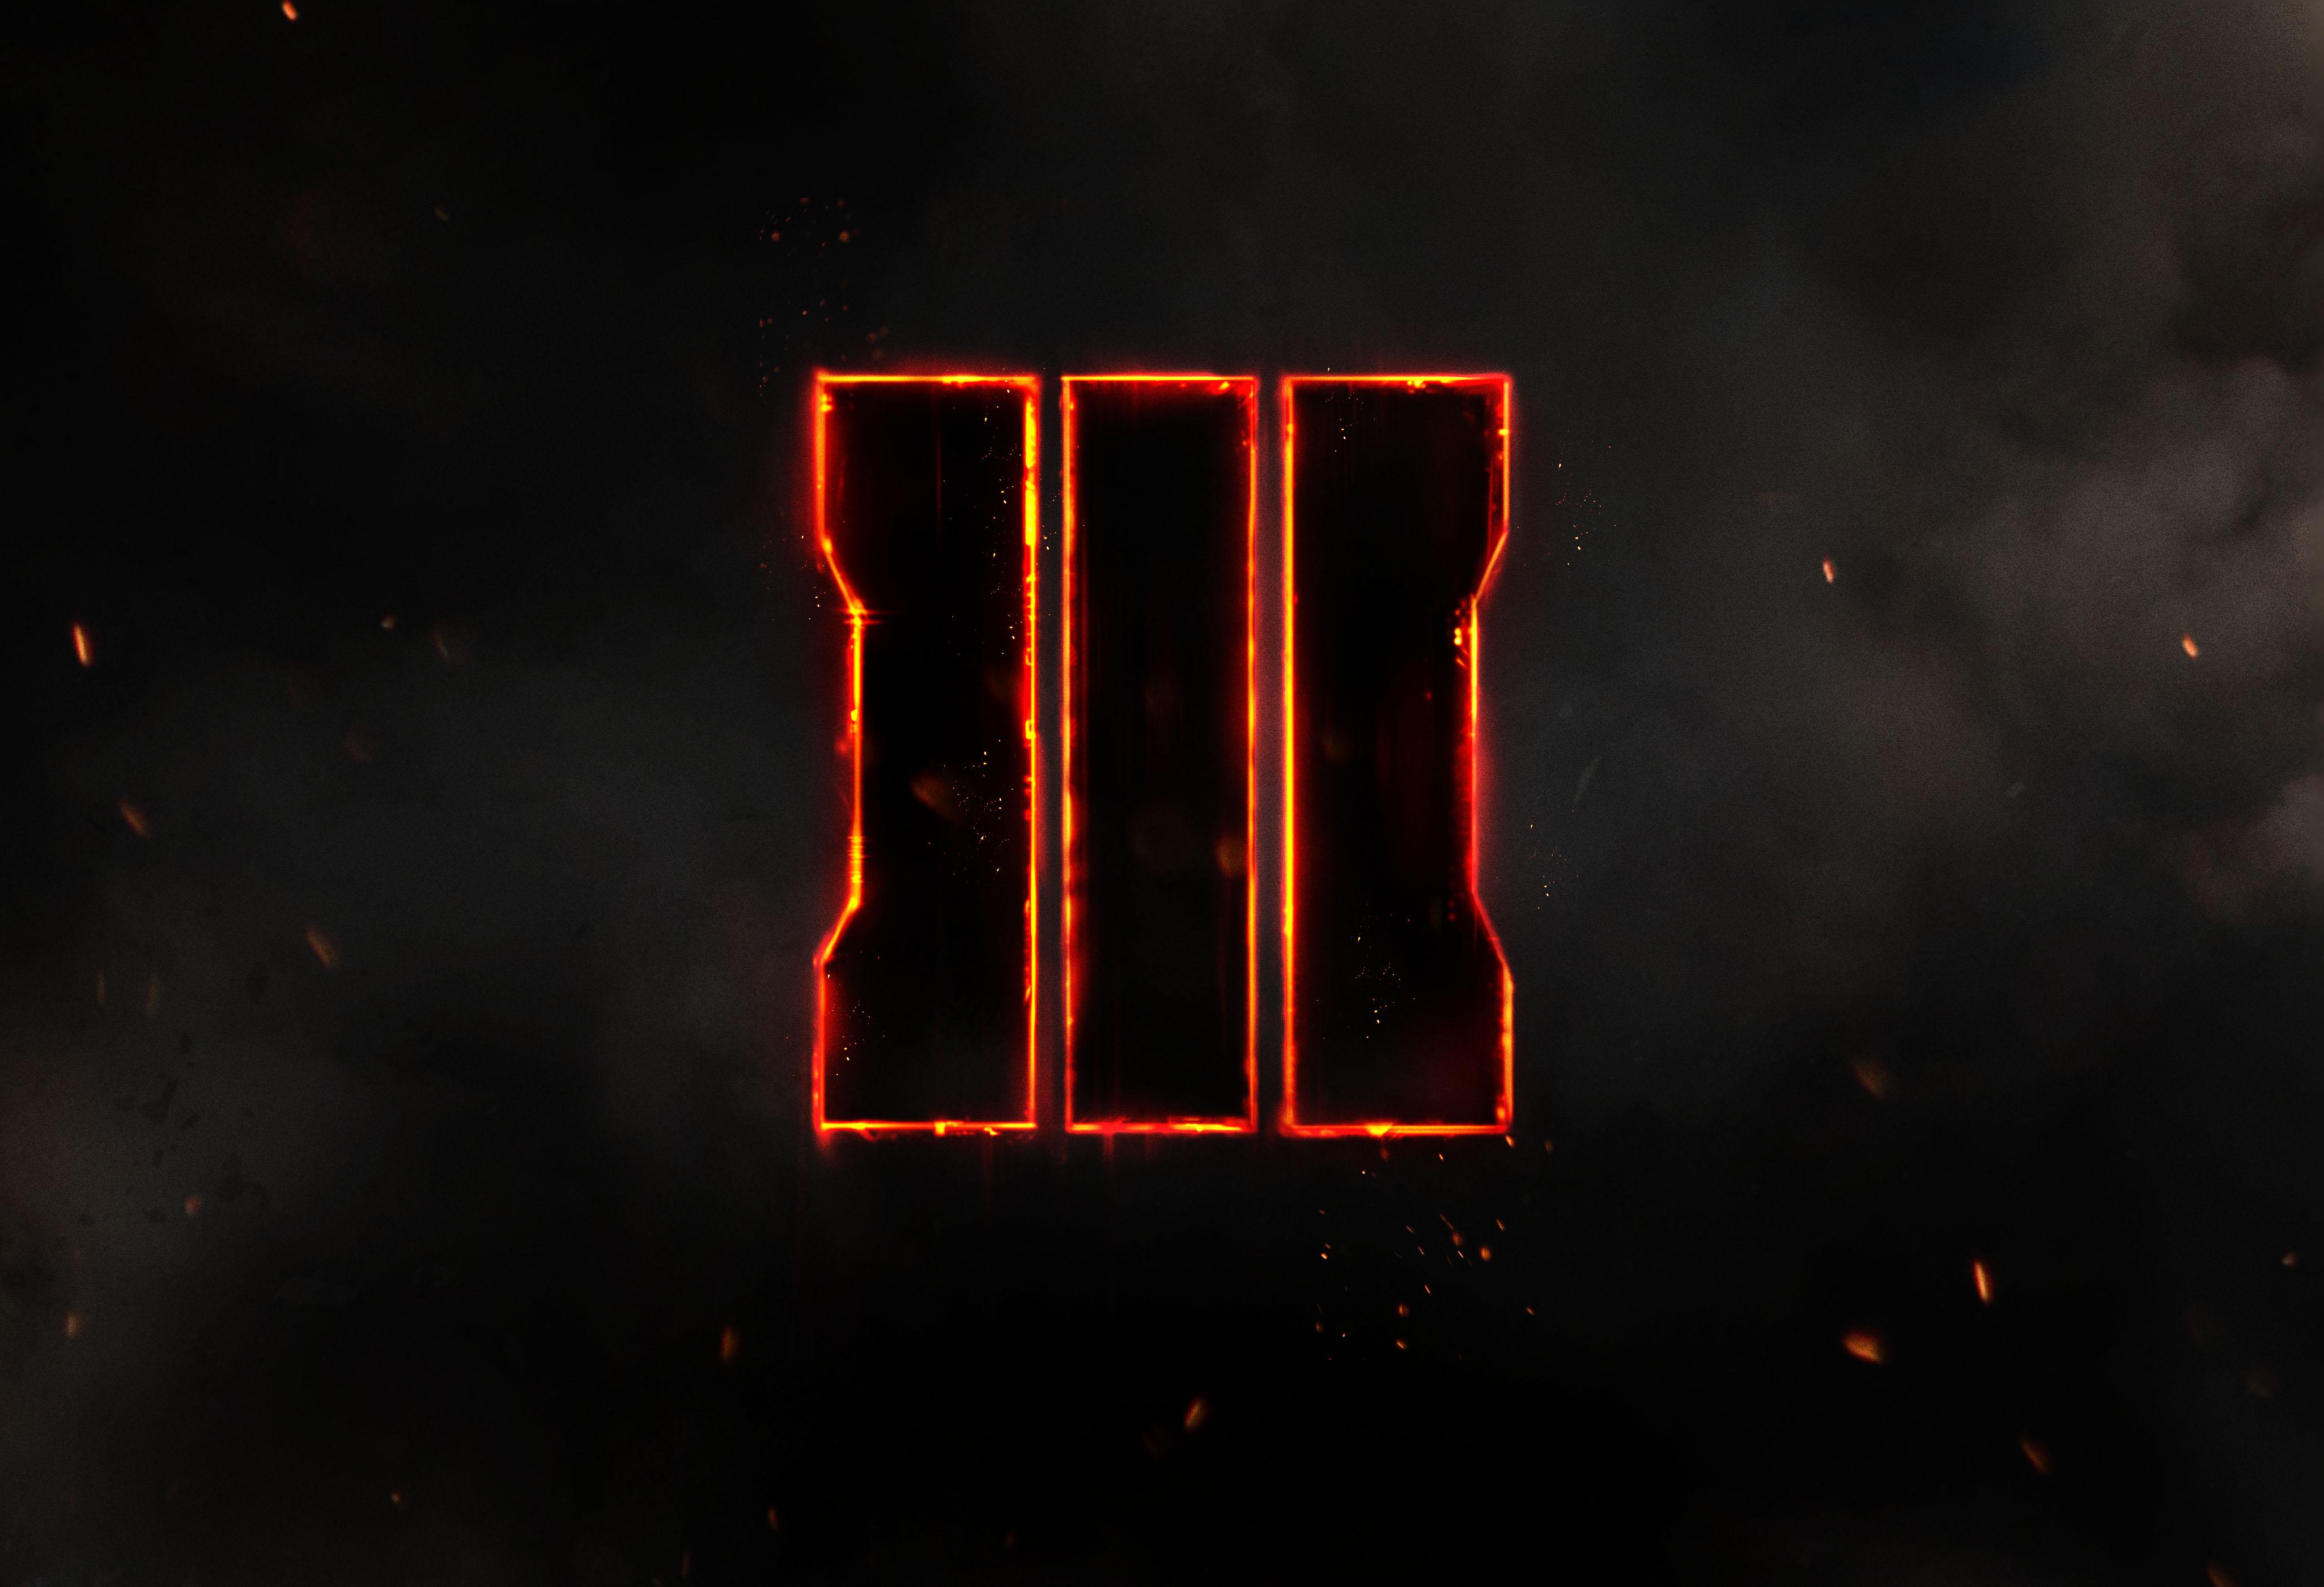 Call of Duty Black Ops 3 wallpaper 2